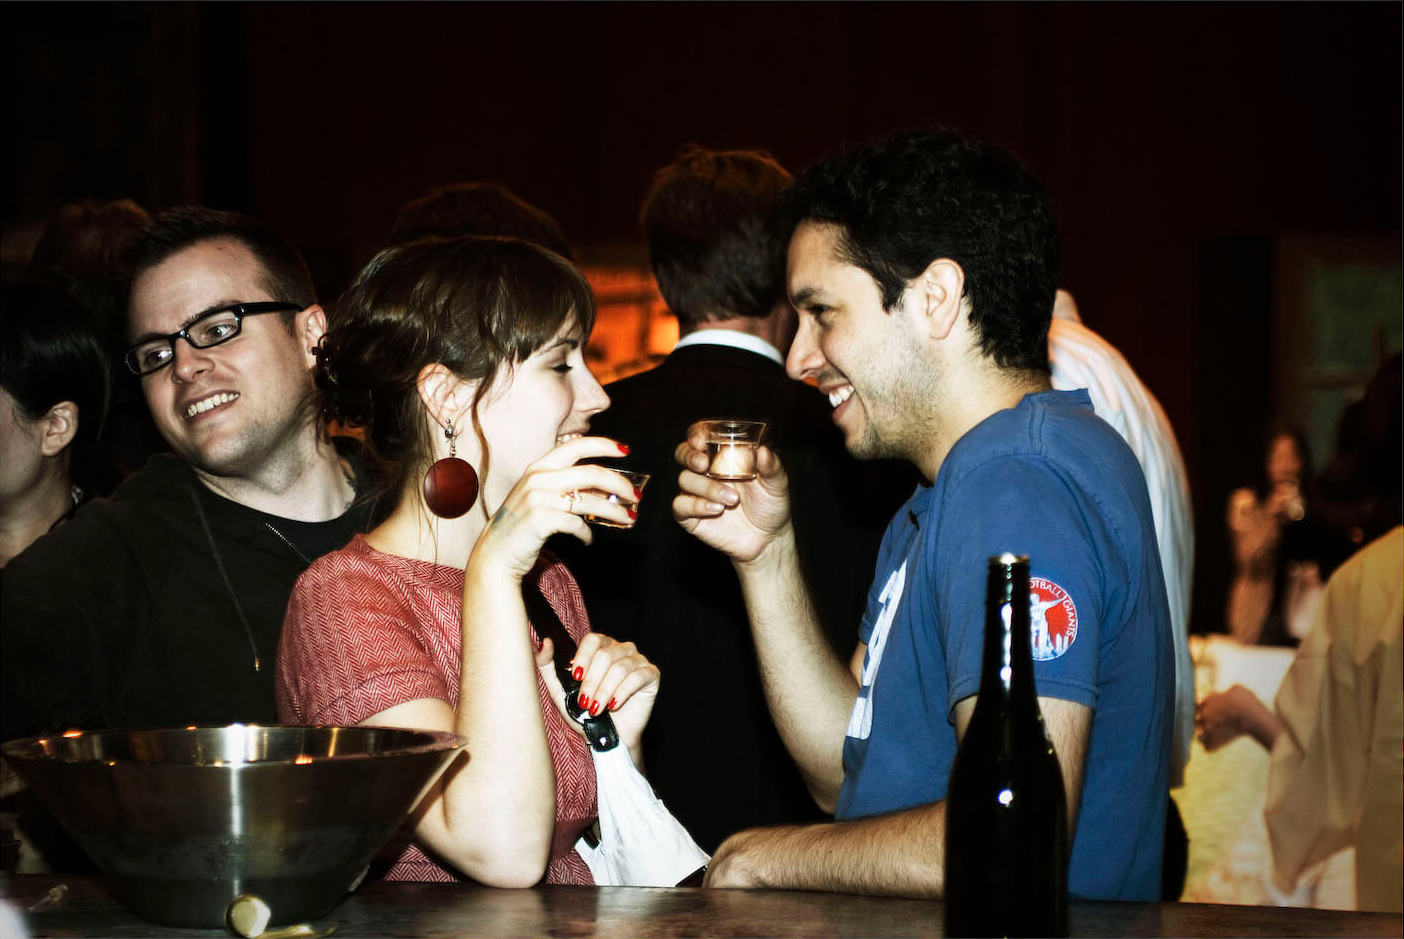 A happy couple facing each other enjoying sake with photo bomb (2008 New York)